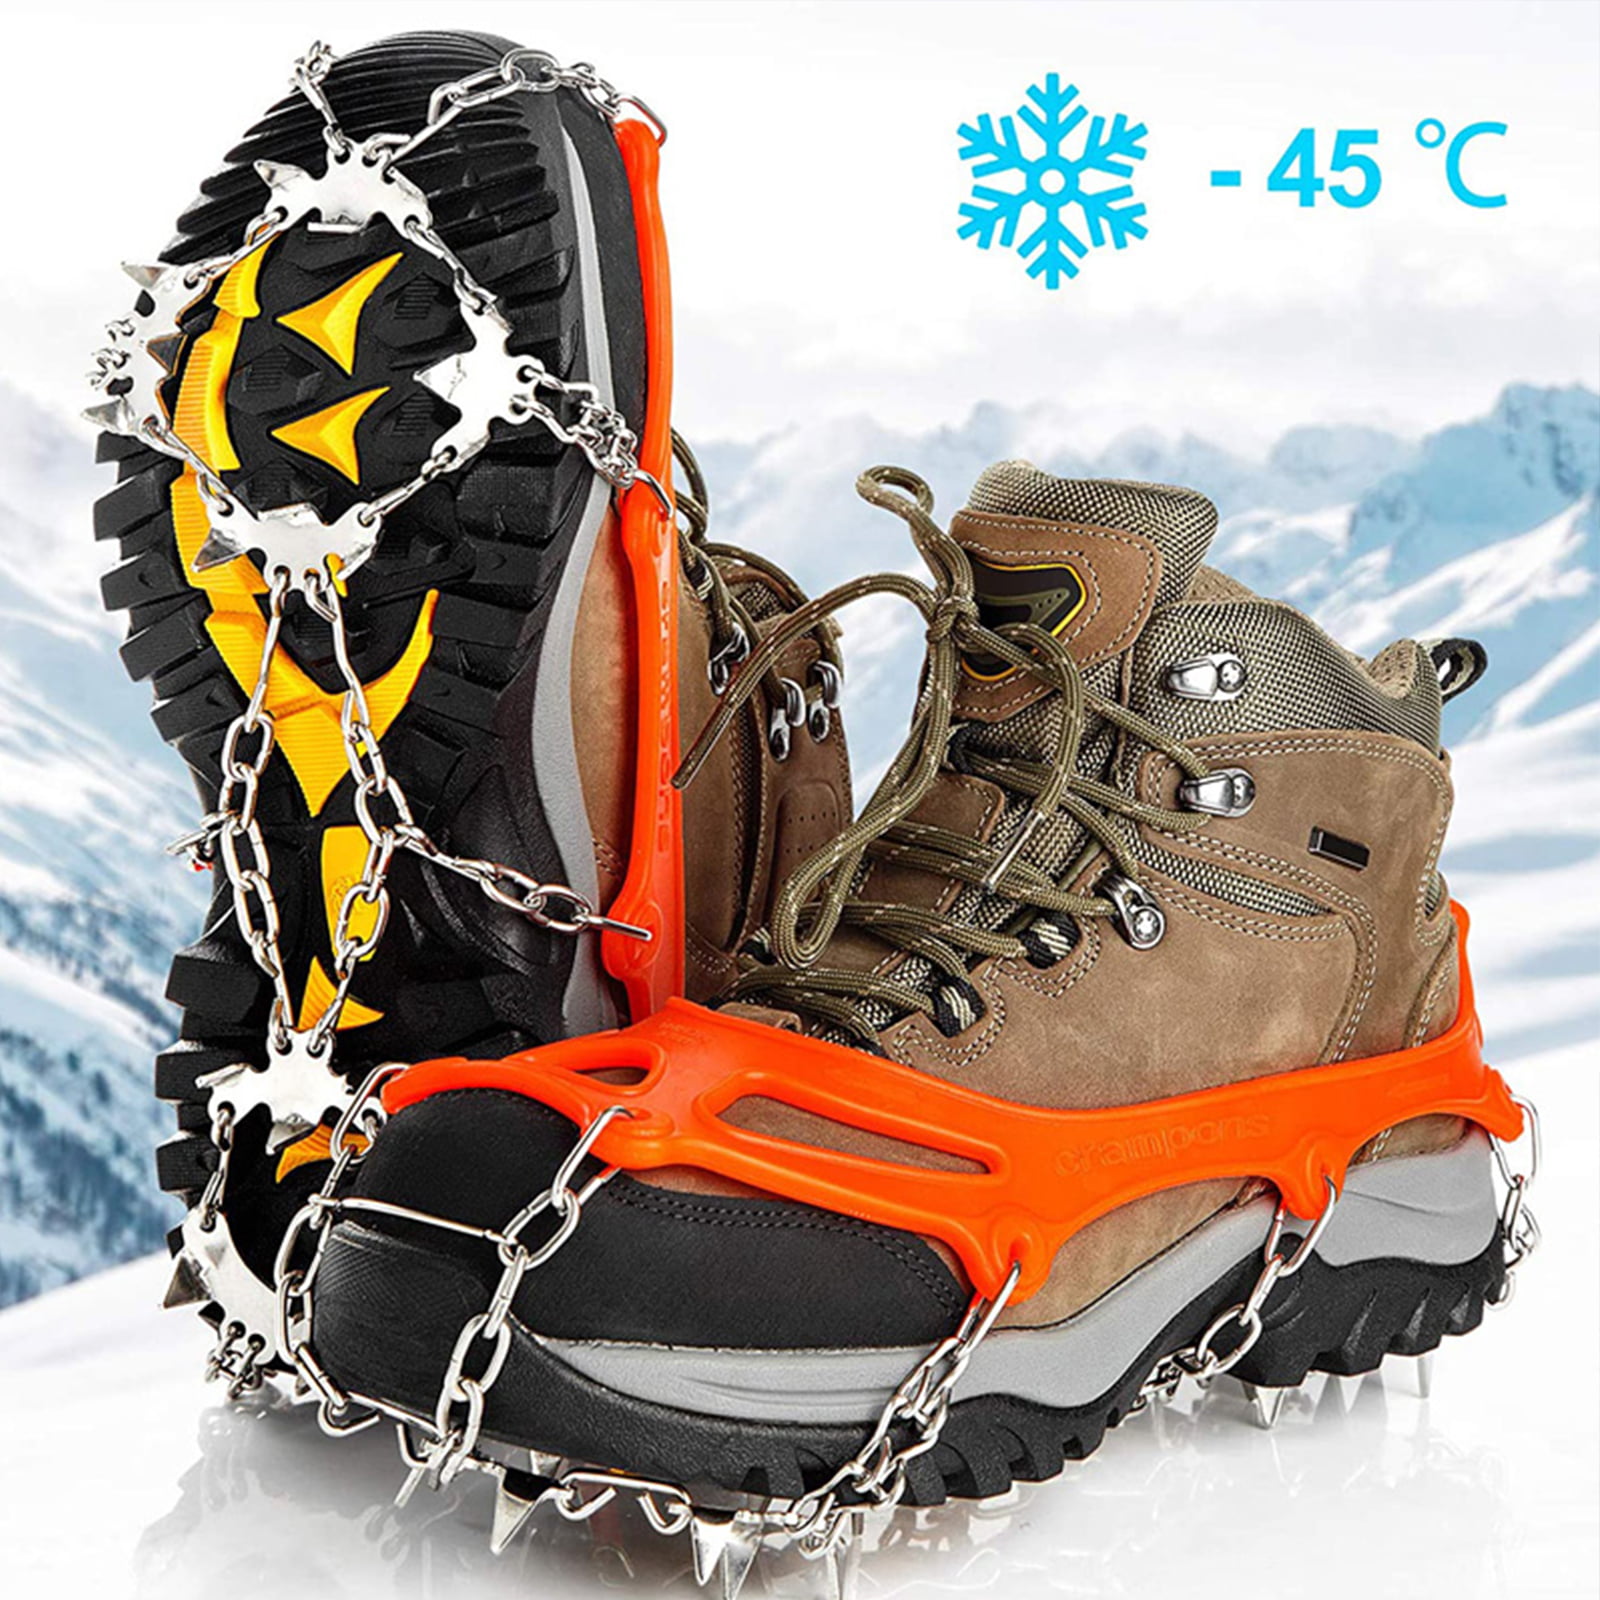 Universal Ice Cleat Shoe Gripper 14 Teeth Non-Slip Shoes Cover for Snow Waling Hiking Climbing 